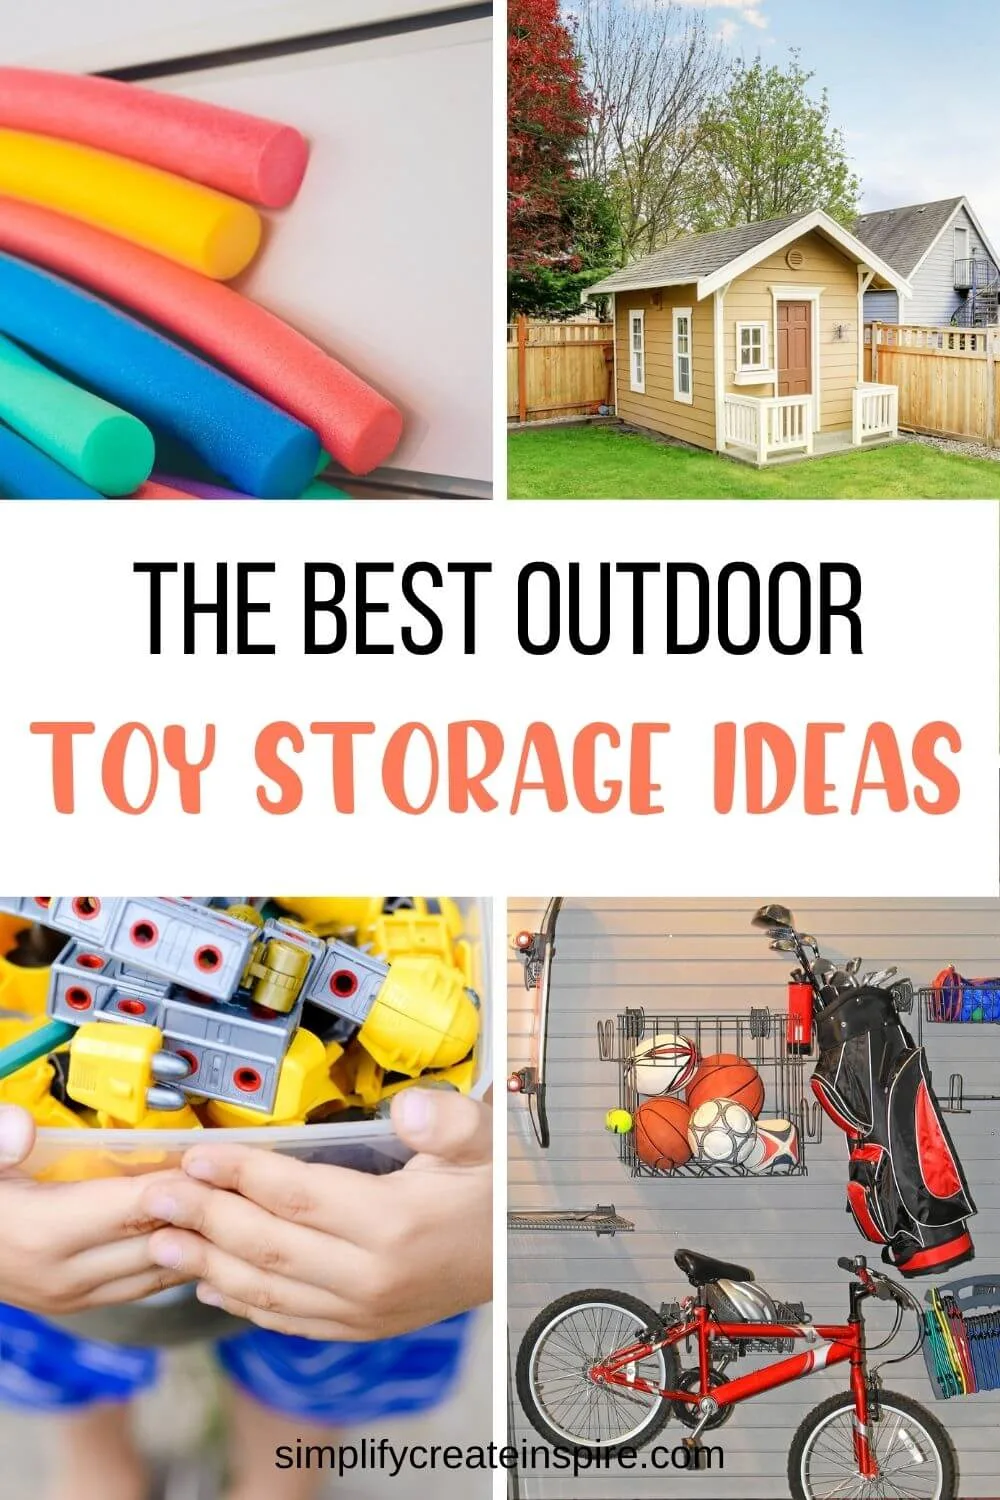 Best outdoor toy storage ideas for backyards